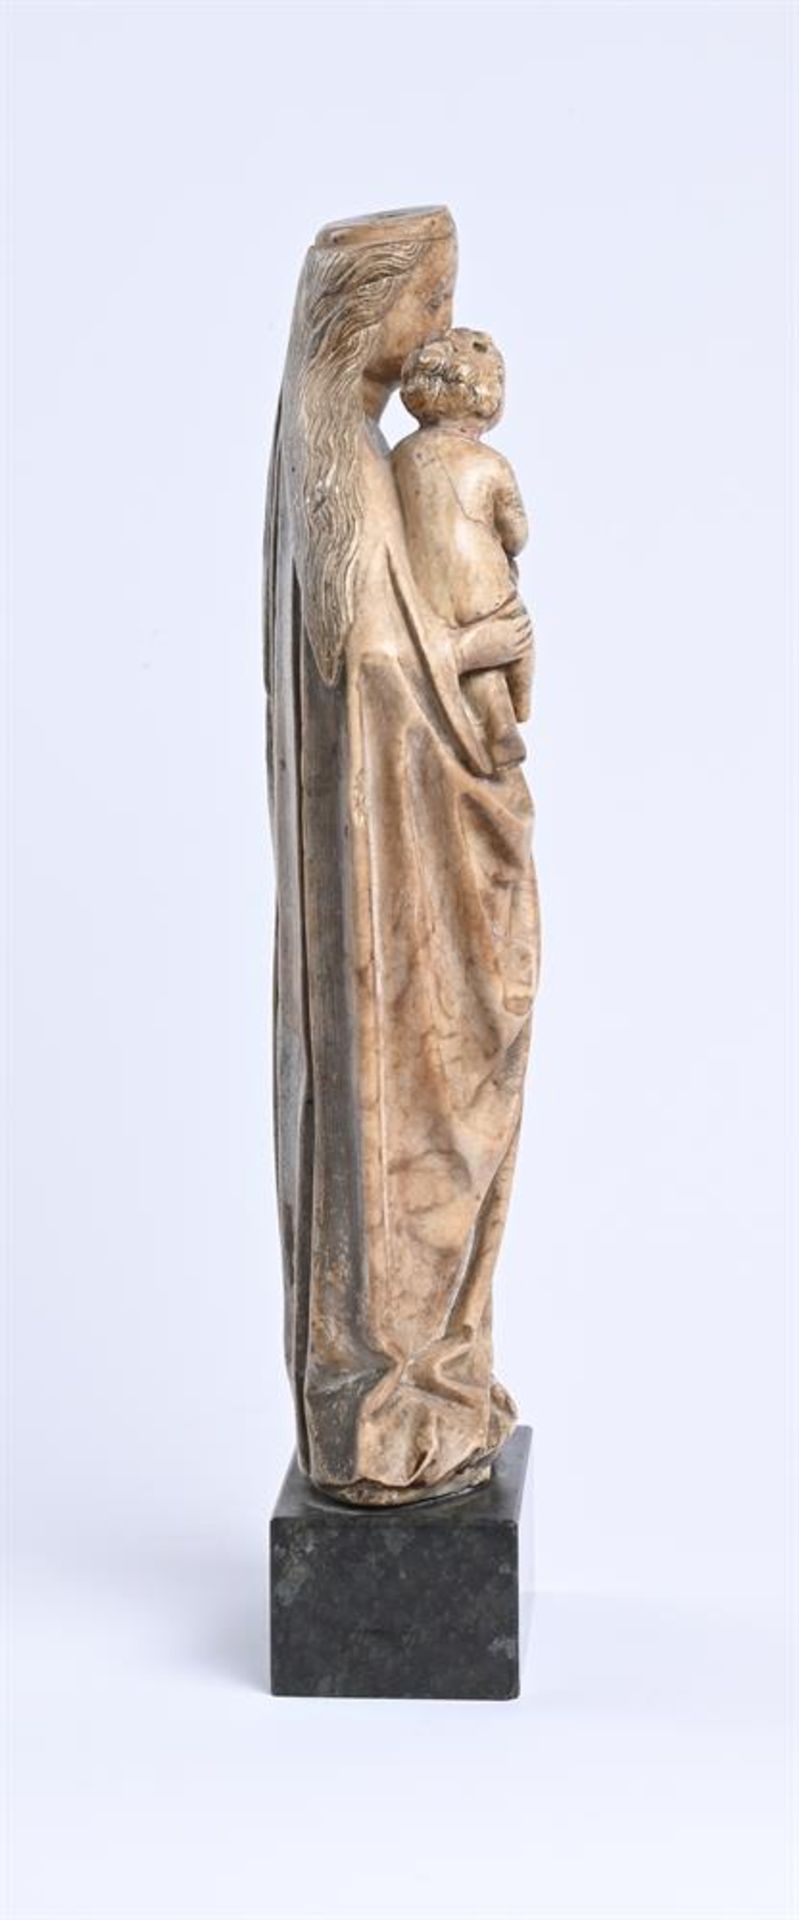 A GOTHIC CARVED ALABASTER FIGURE OF THE VIRGIN AND CHILD, 14TH CENTURY - Image 7 of 9